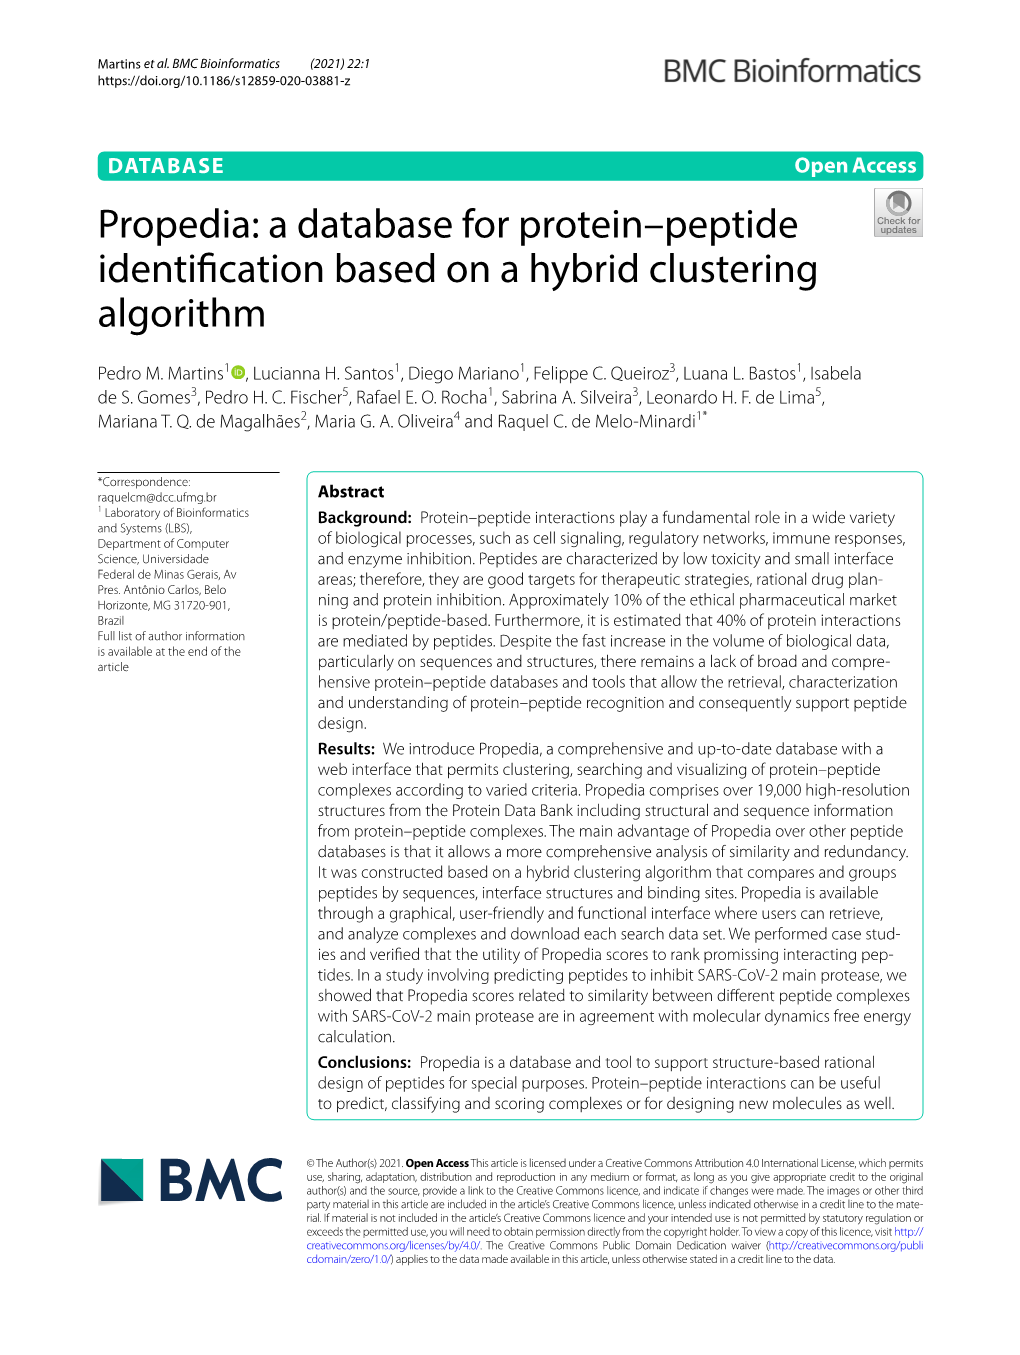 Propedia: a Database for Protein–Peptide Identification Based on A